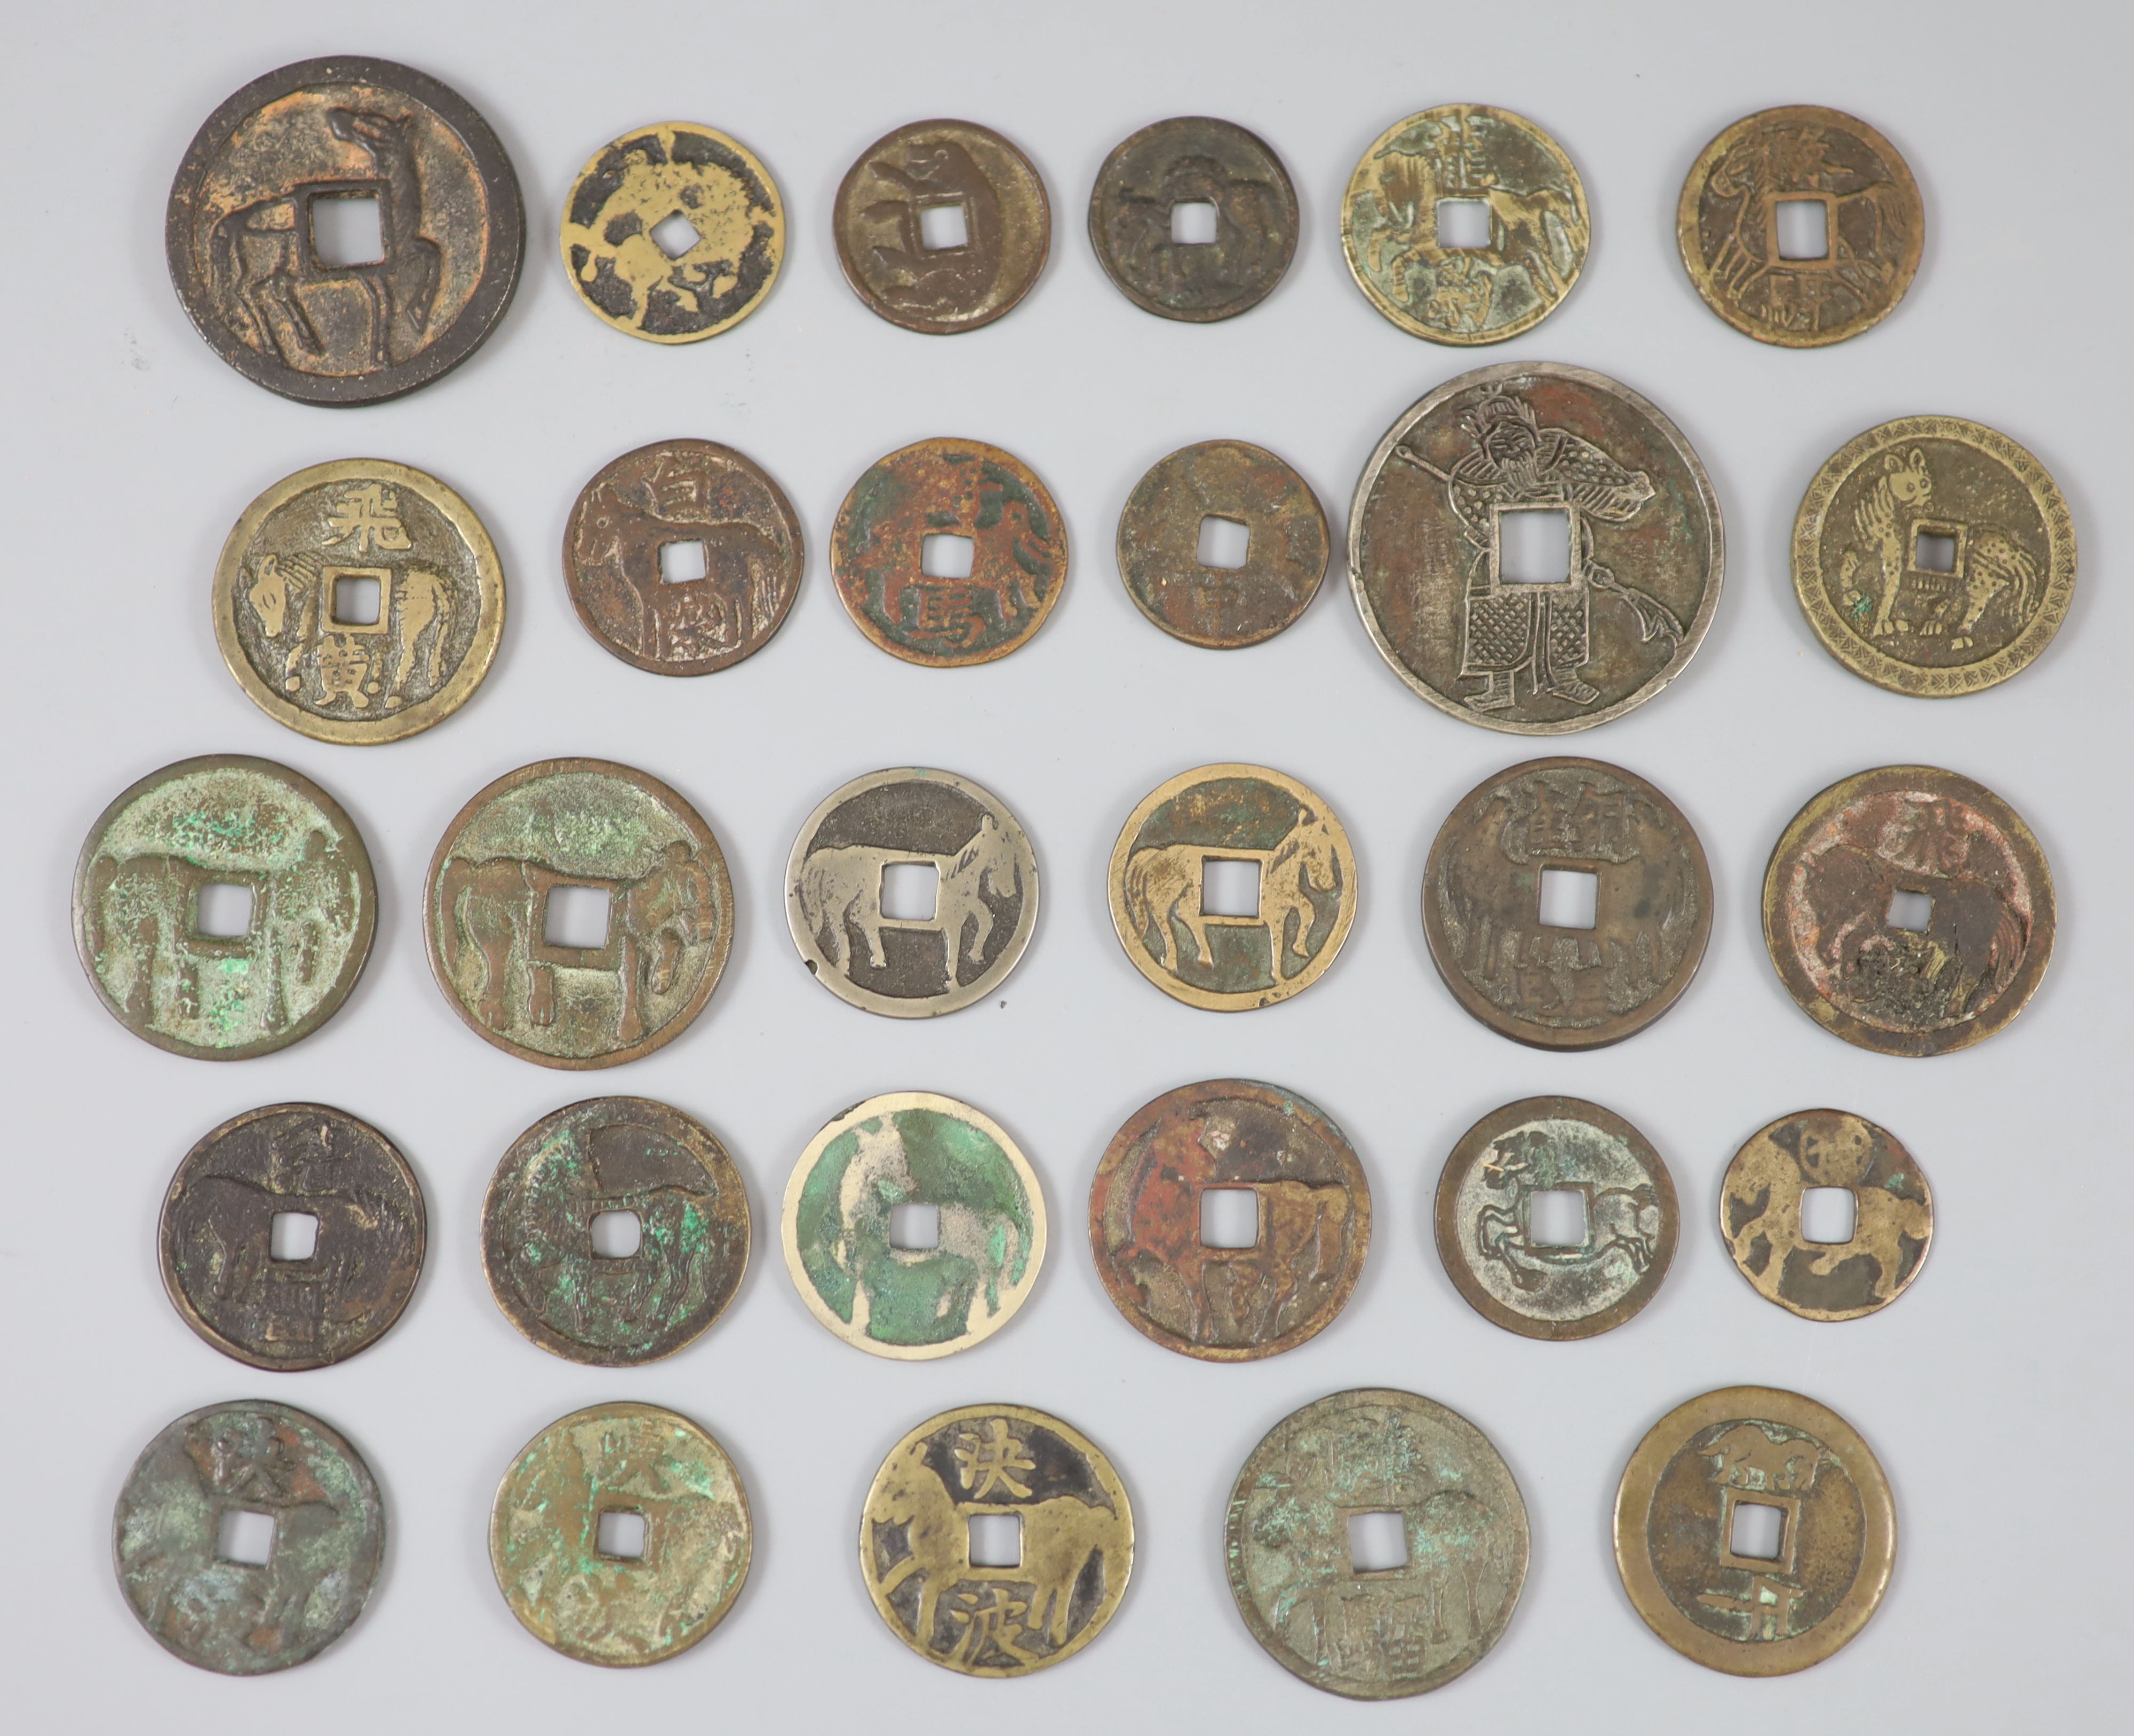 China, 19 bronze horse gaming charms, Qing dynasty - Republic period,